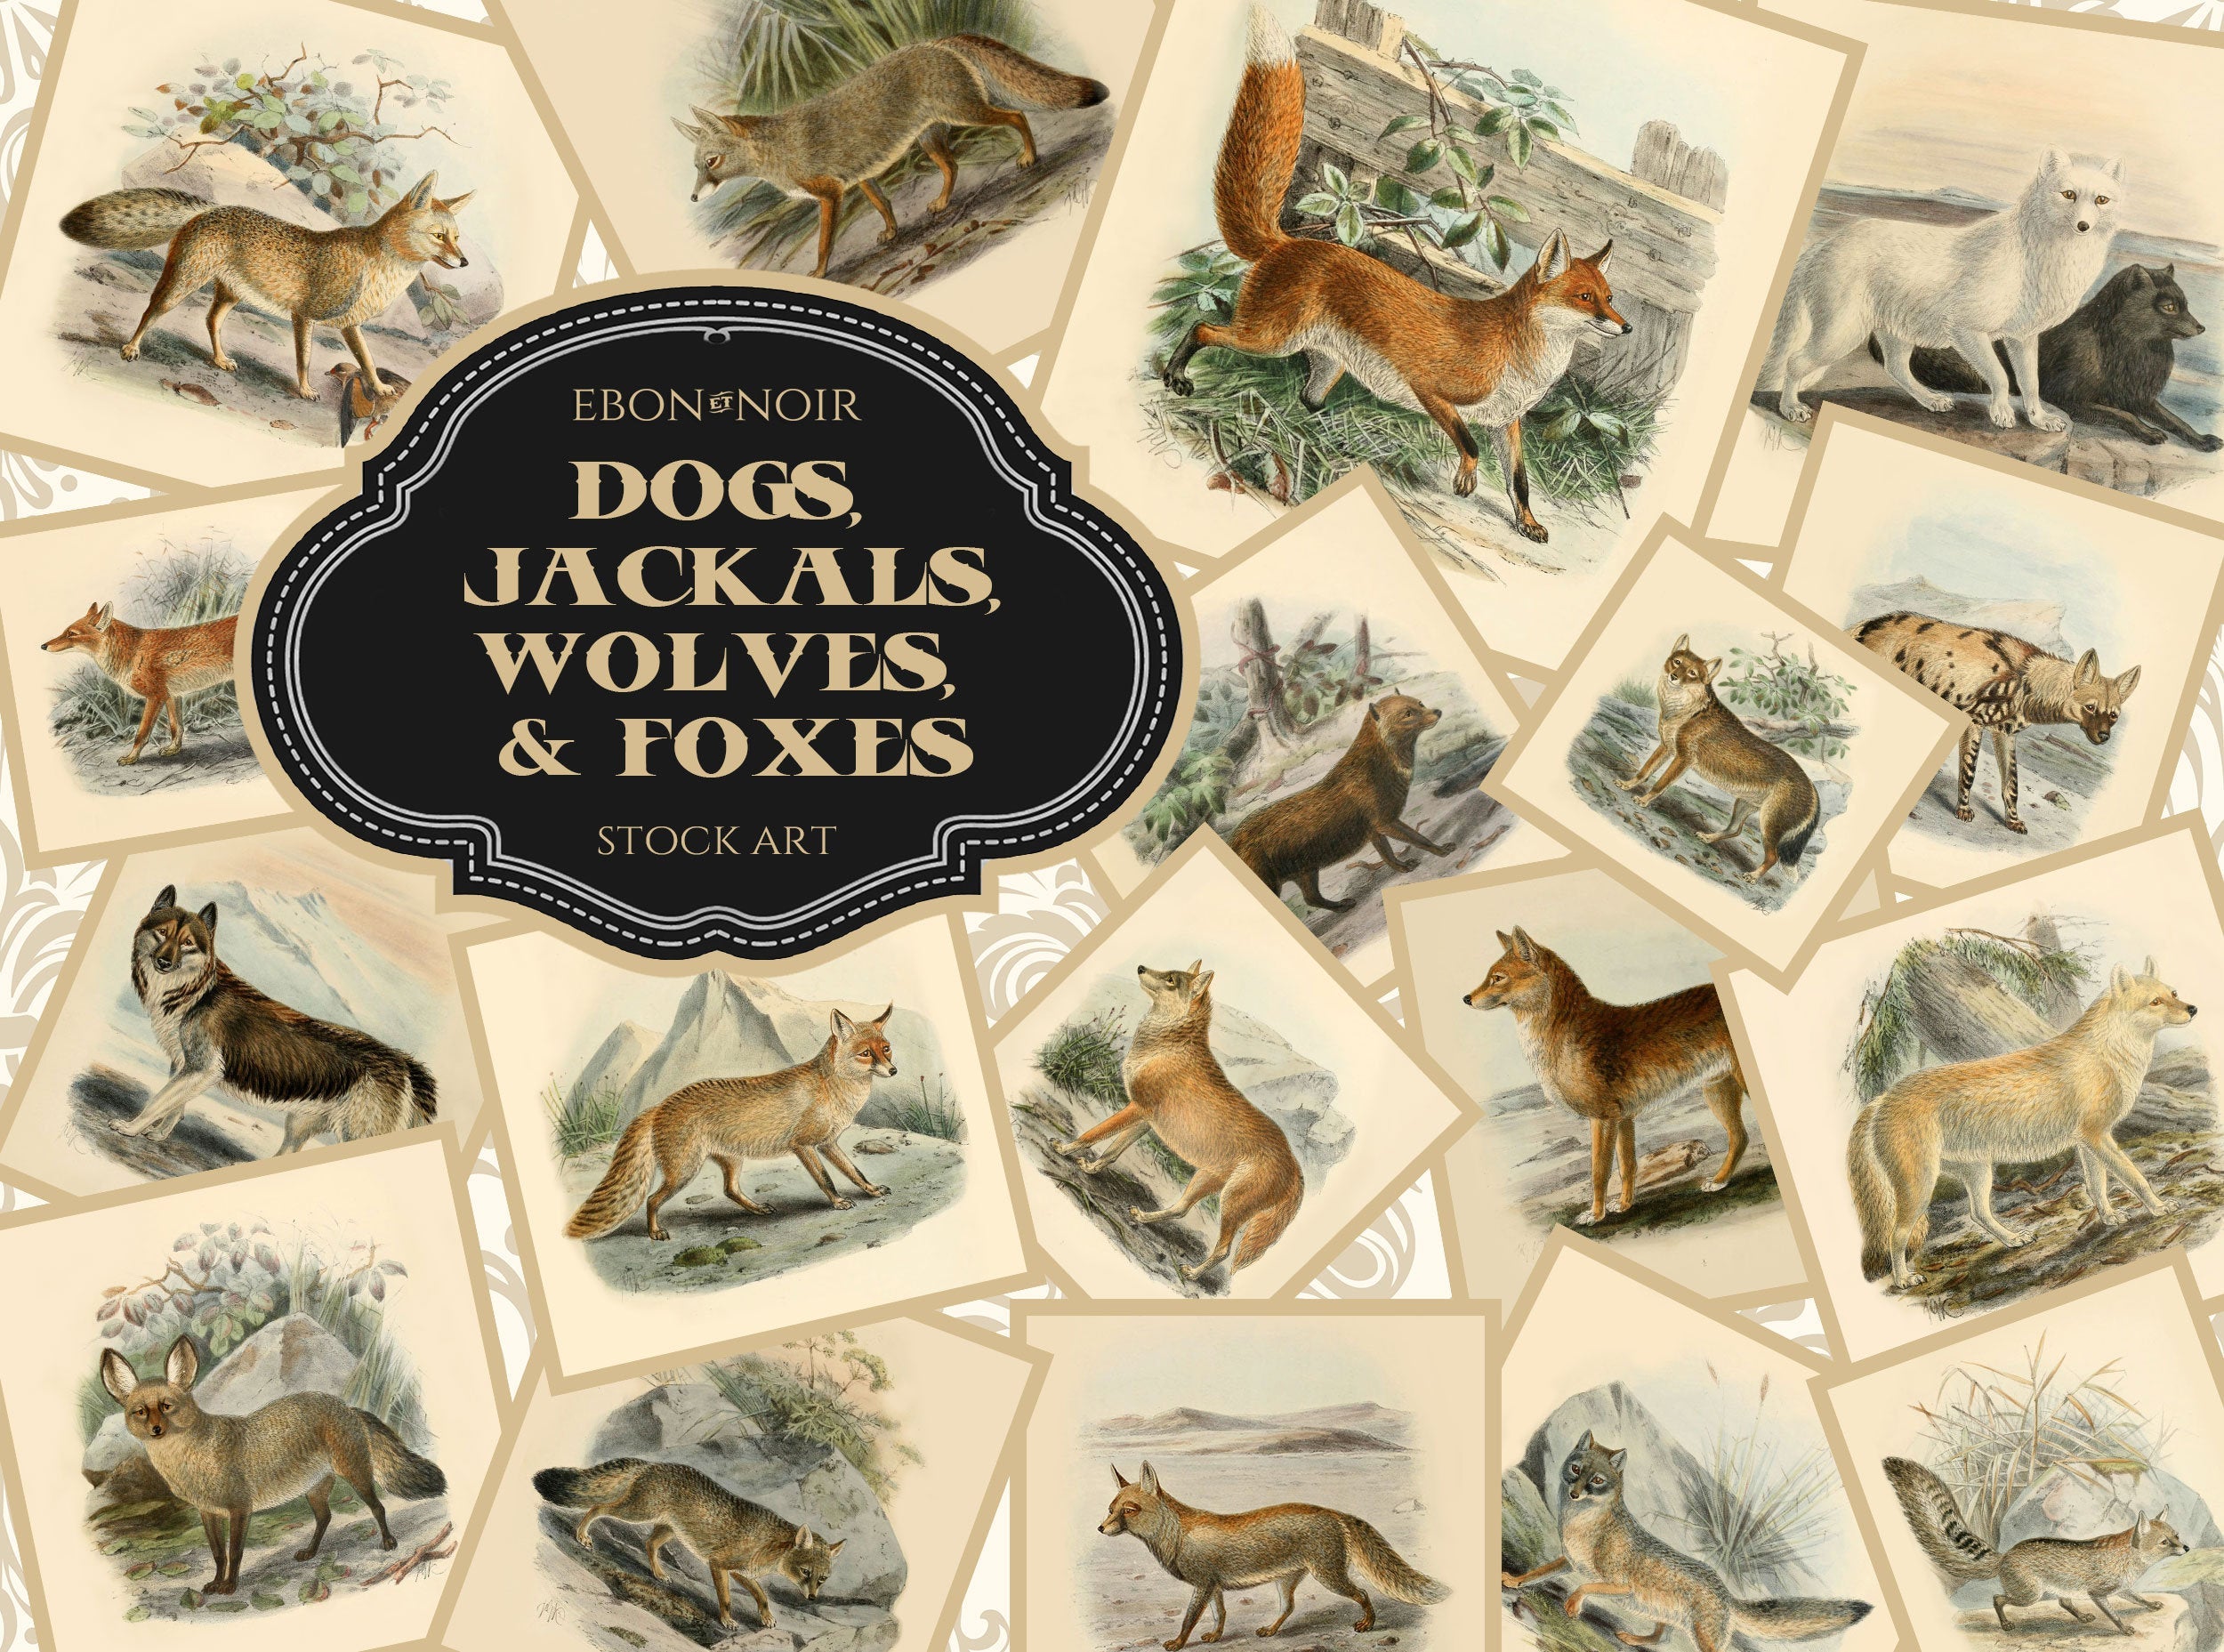 28 JPG's of Dogs, Jackals, Wolves, and Foxes, Drawn From Nature and Hand-colored by J. G. Keulmans, 1890